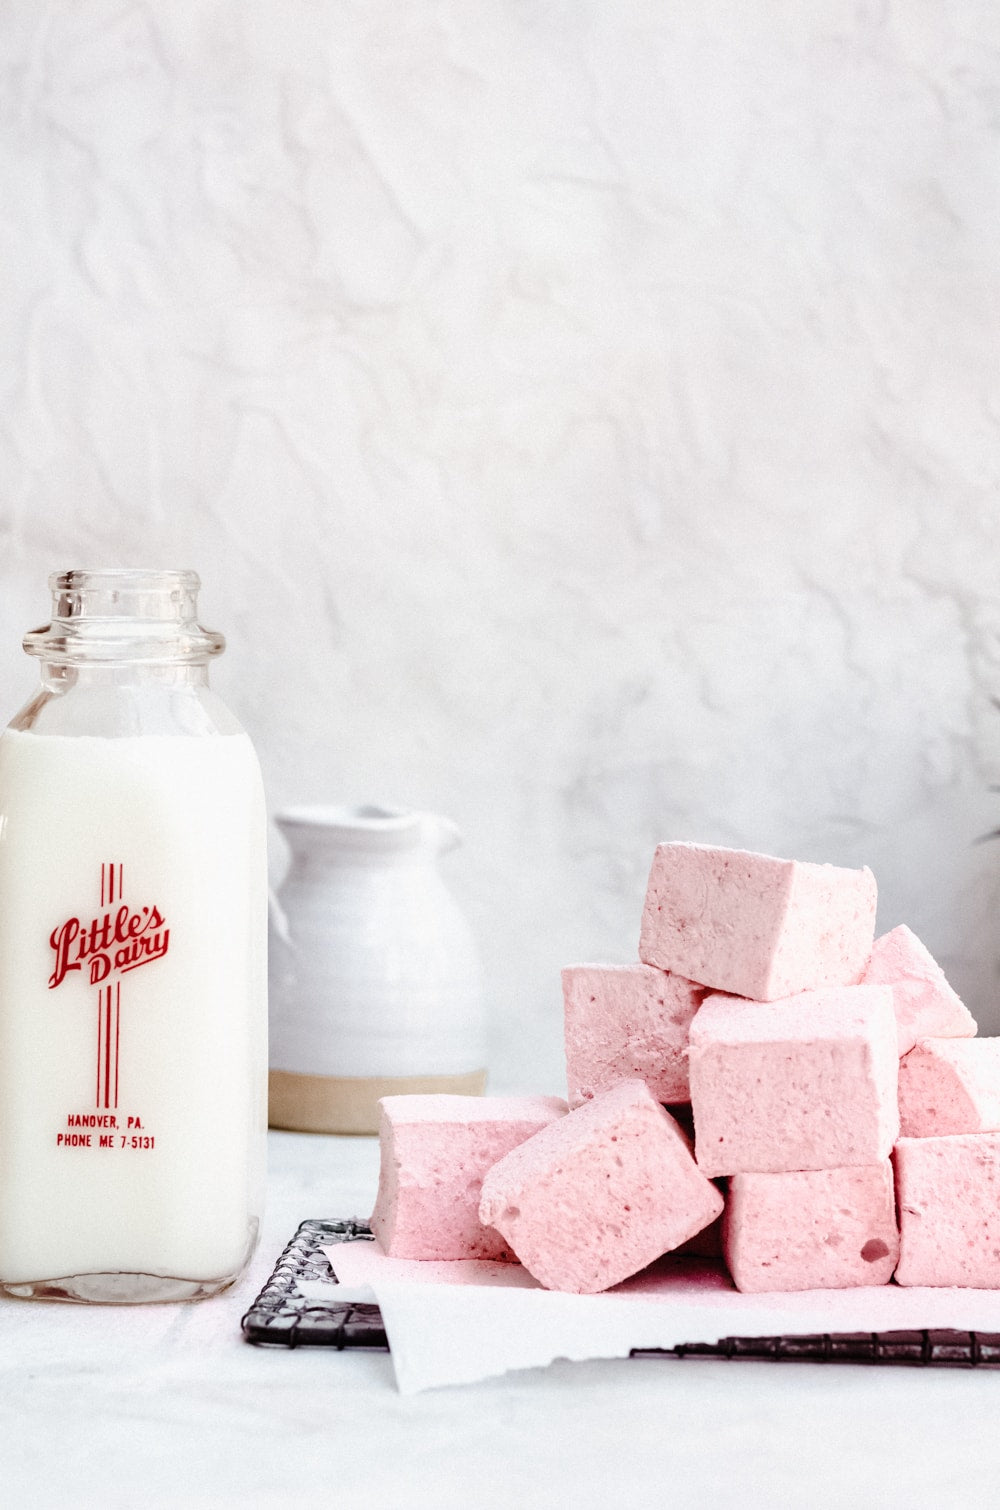 Pillowy strawberry marshmallows are such an easy no-bake treat that everyone loves